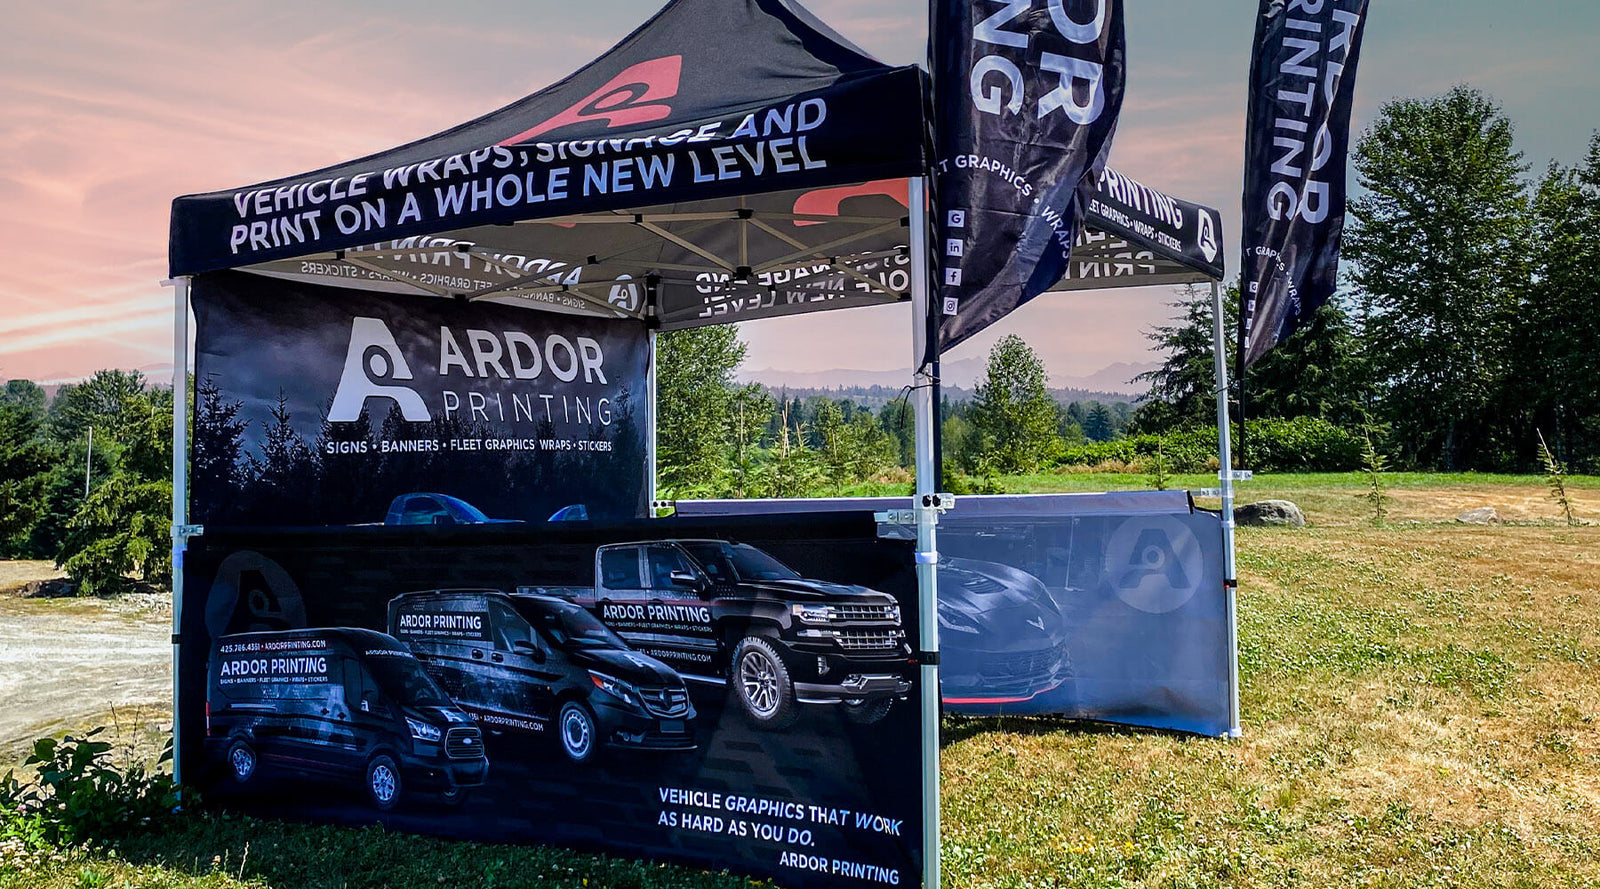 A vibrant and eye-catching custom event tent setup by Ardor Printing, featuring a full-color printed canopy, back wall, side half walls, and two feather flags, all in dark colors with black, gray, and maroon accents, on a grass lawn during a sunny day.